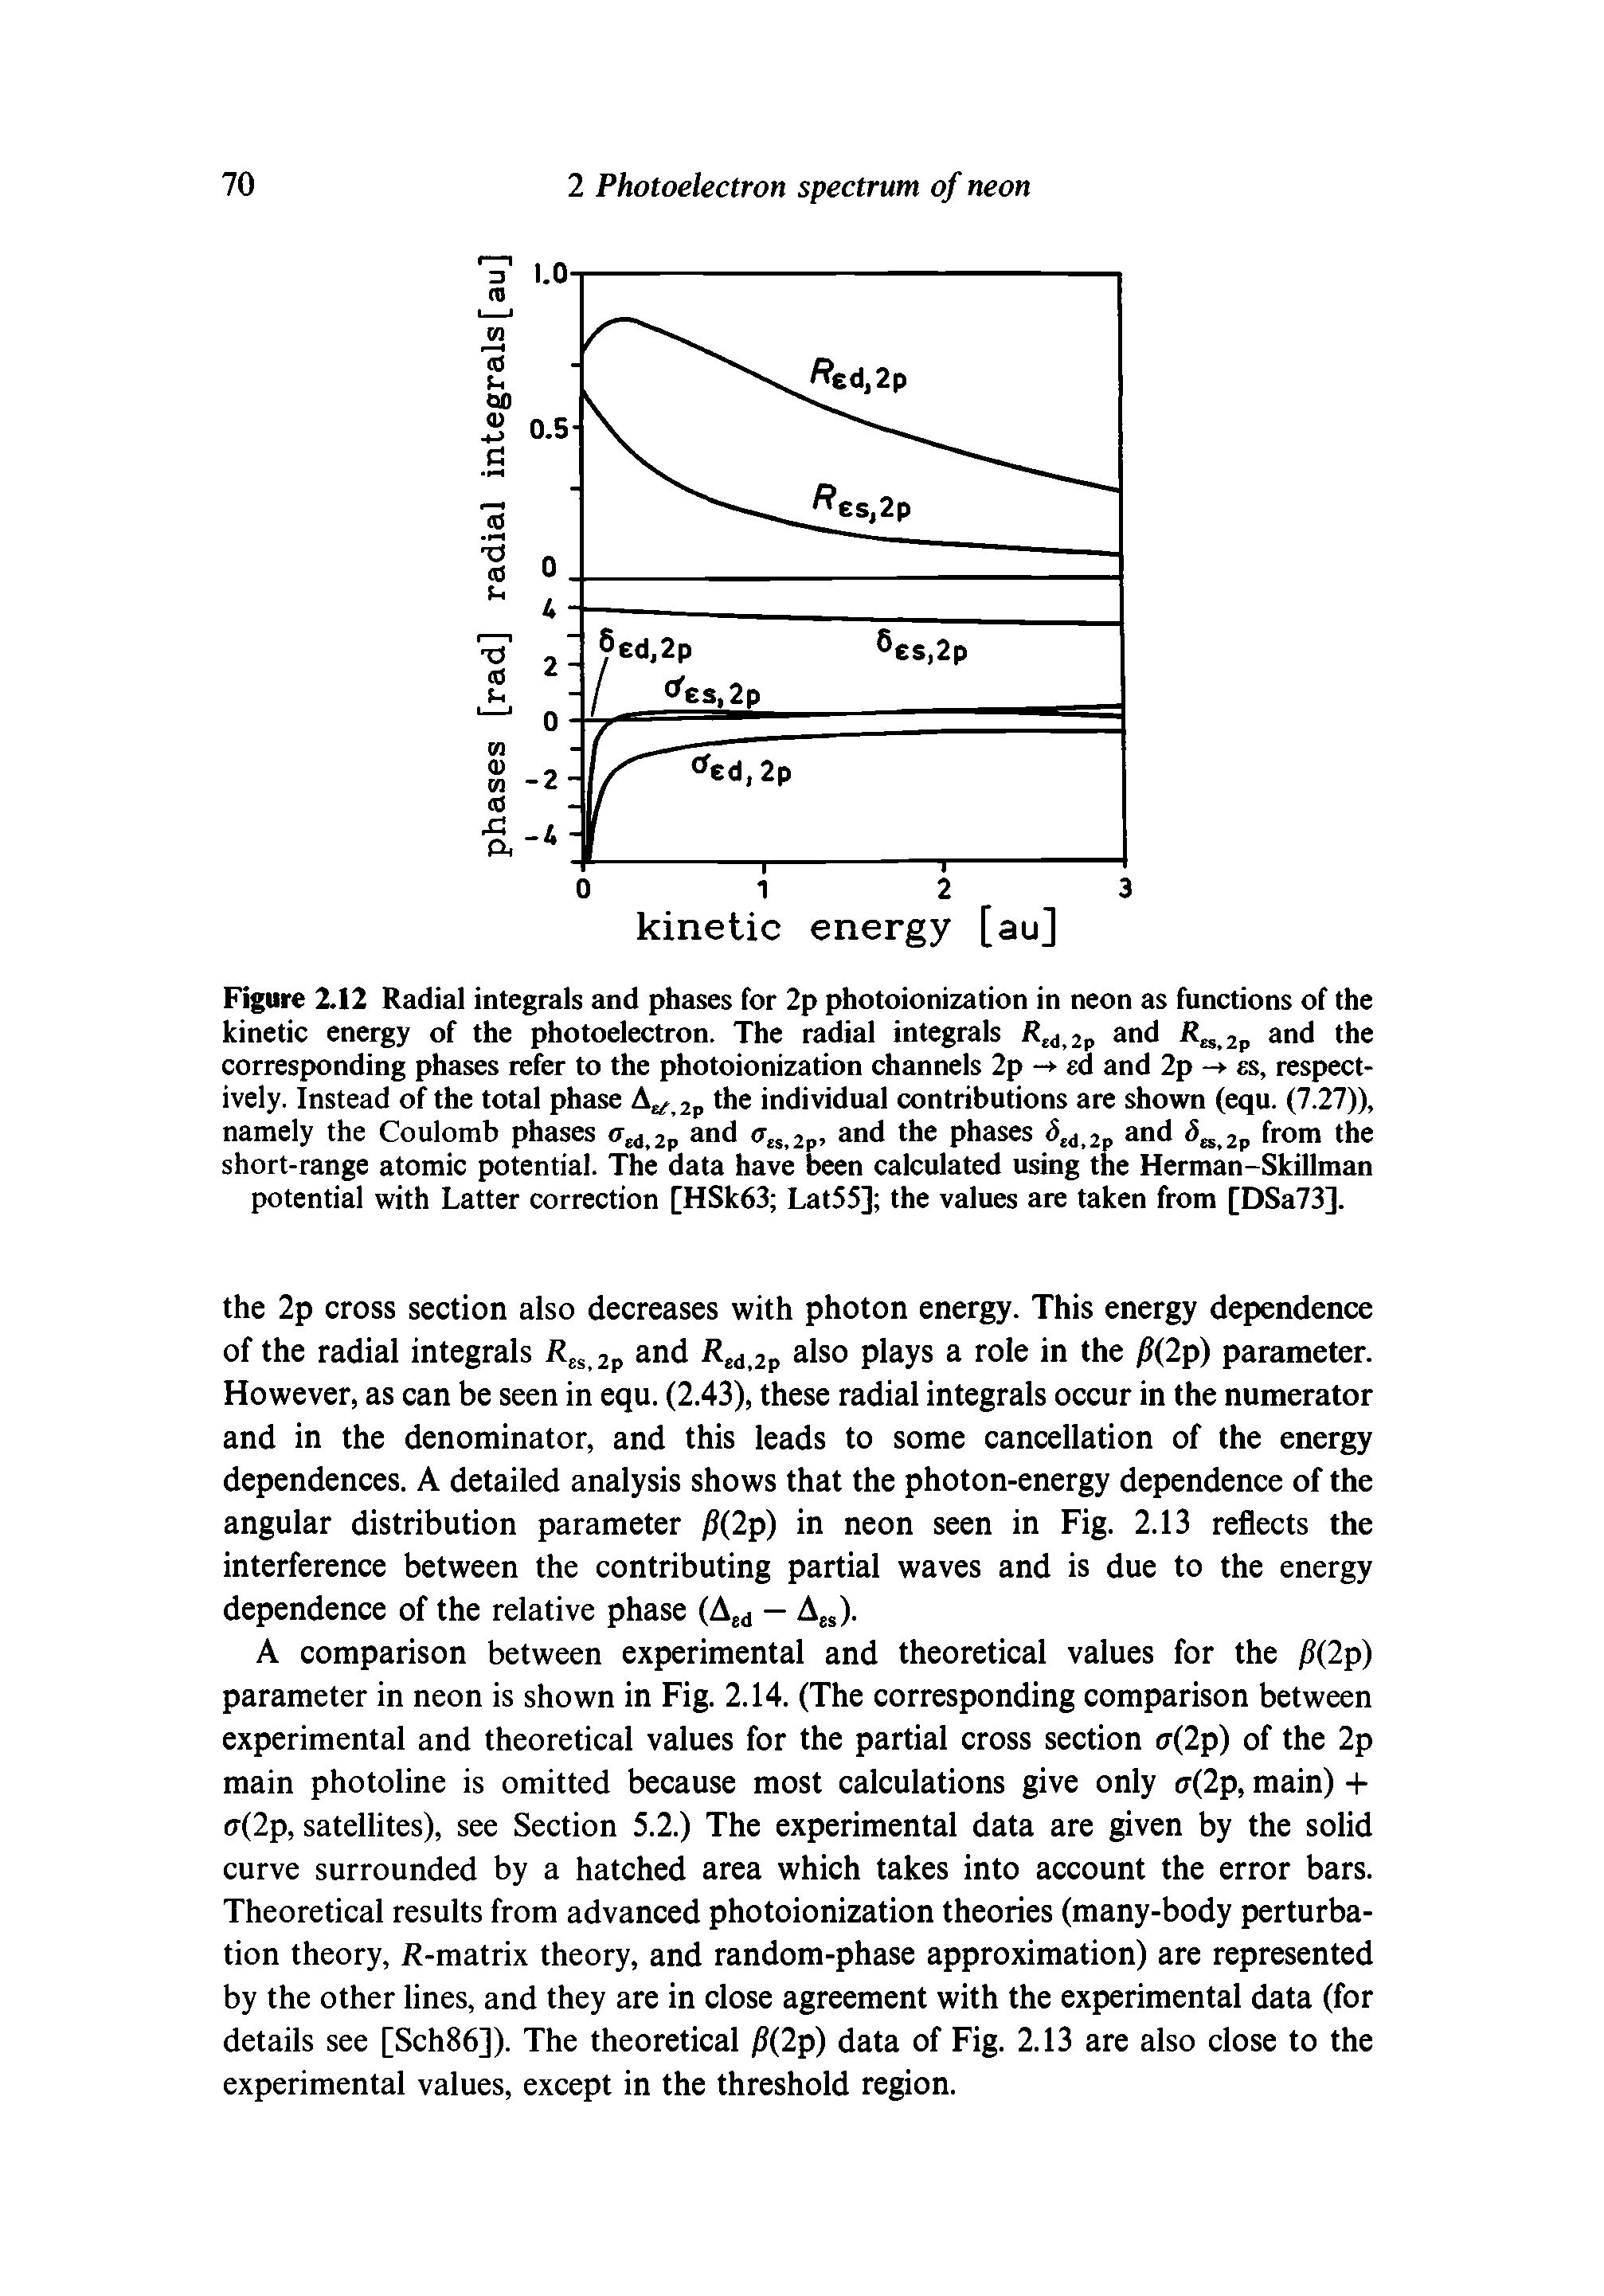 Figure 2.12 Radial integrals and phases for 2p photoionization in neon as functions of the kinetic energy of the photoelectron. The radial integrals R d2p and R s2p and the corresponding phases refer to the photoionization channels 2p - sd and 2p -> ss, respectively. Instead of the total phase 2p the individual contributions are shown (equ. (7.27)), namely the Coulomb phases <7ed2p and <r s2p, and the phases <5 d 2p and <5 s 2p from the short-range atomic potential. The data have been calculated using the Herman-Skillman potential with Latter correction [HSk63 Lat55] the values are taken from [DSa73].